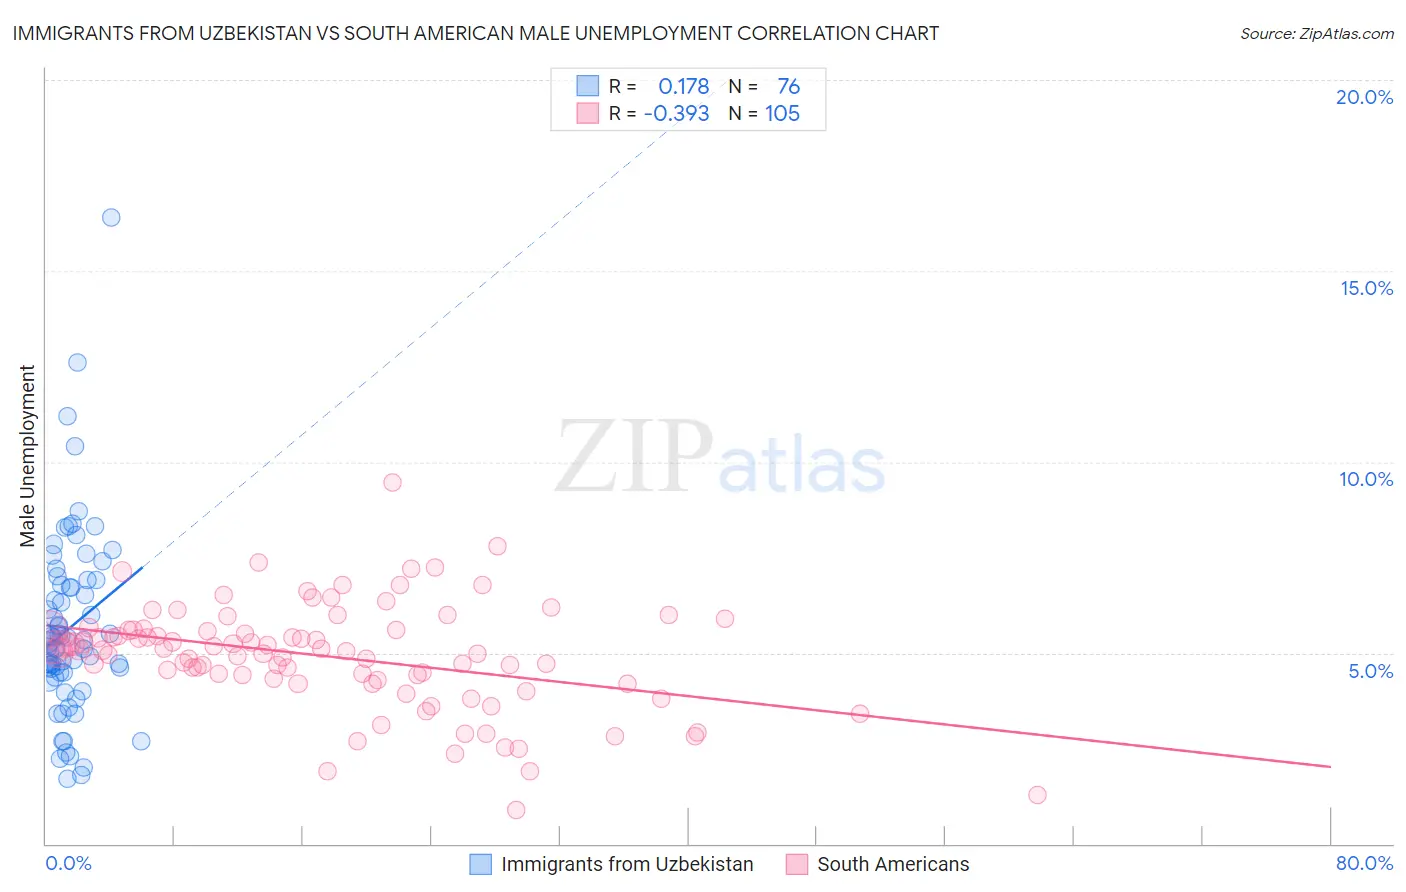 Immigrants from Uzbekistan vs South American Male Unemployment